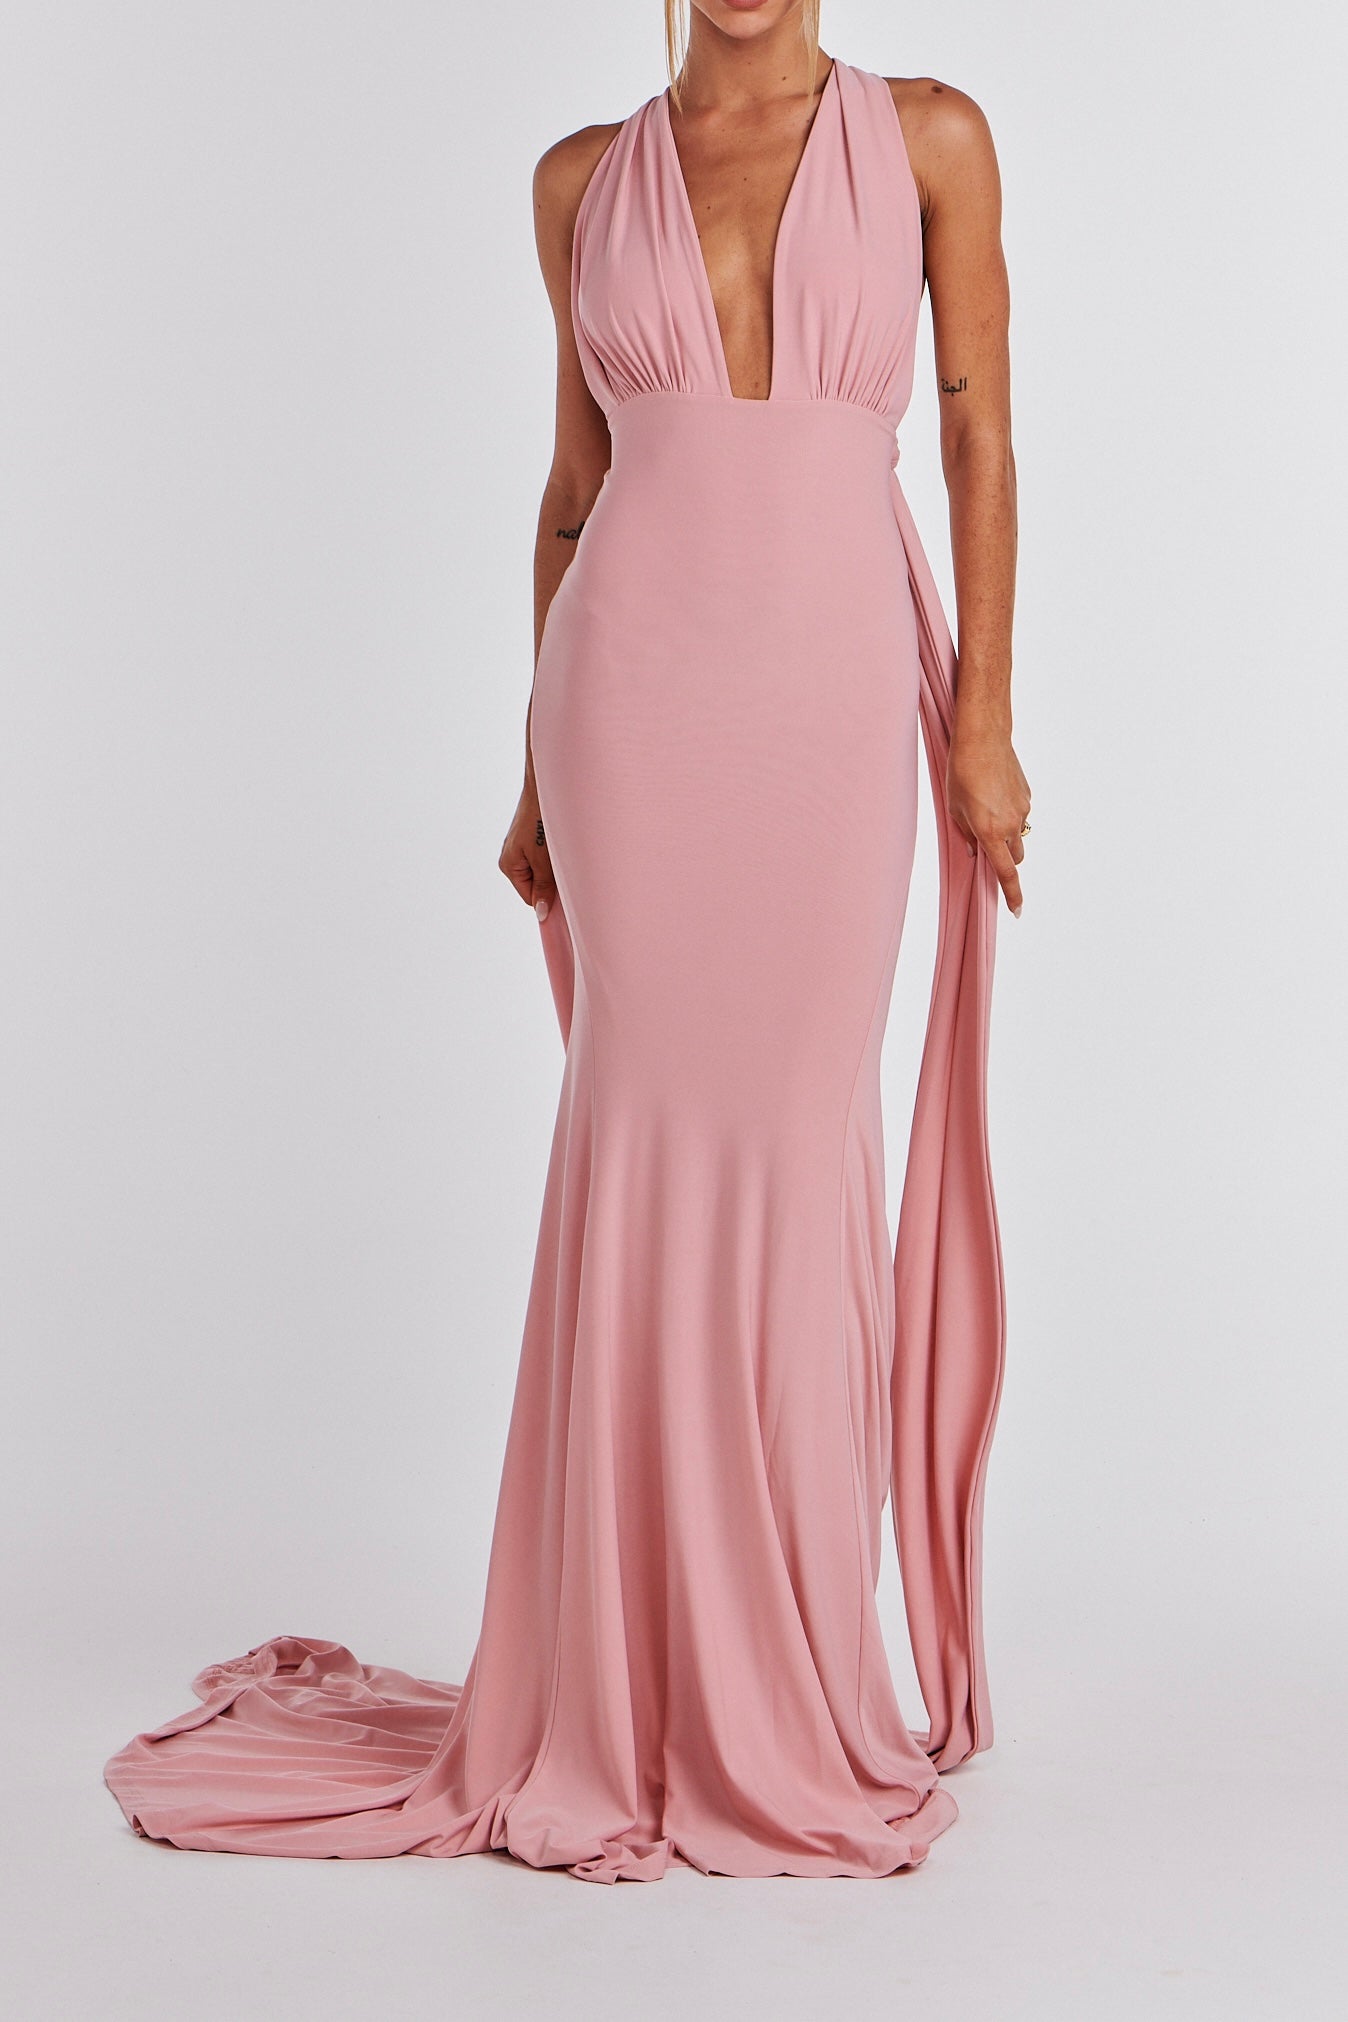 MÉLANI The Label ELIANA Blush Multi Tie Backless Bridesmaid Formal Gown